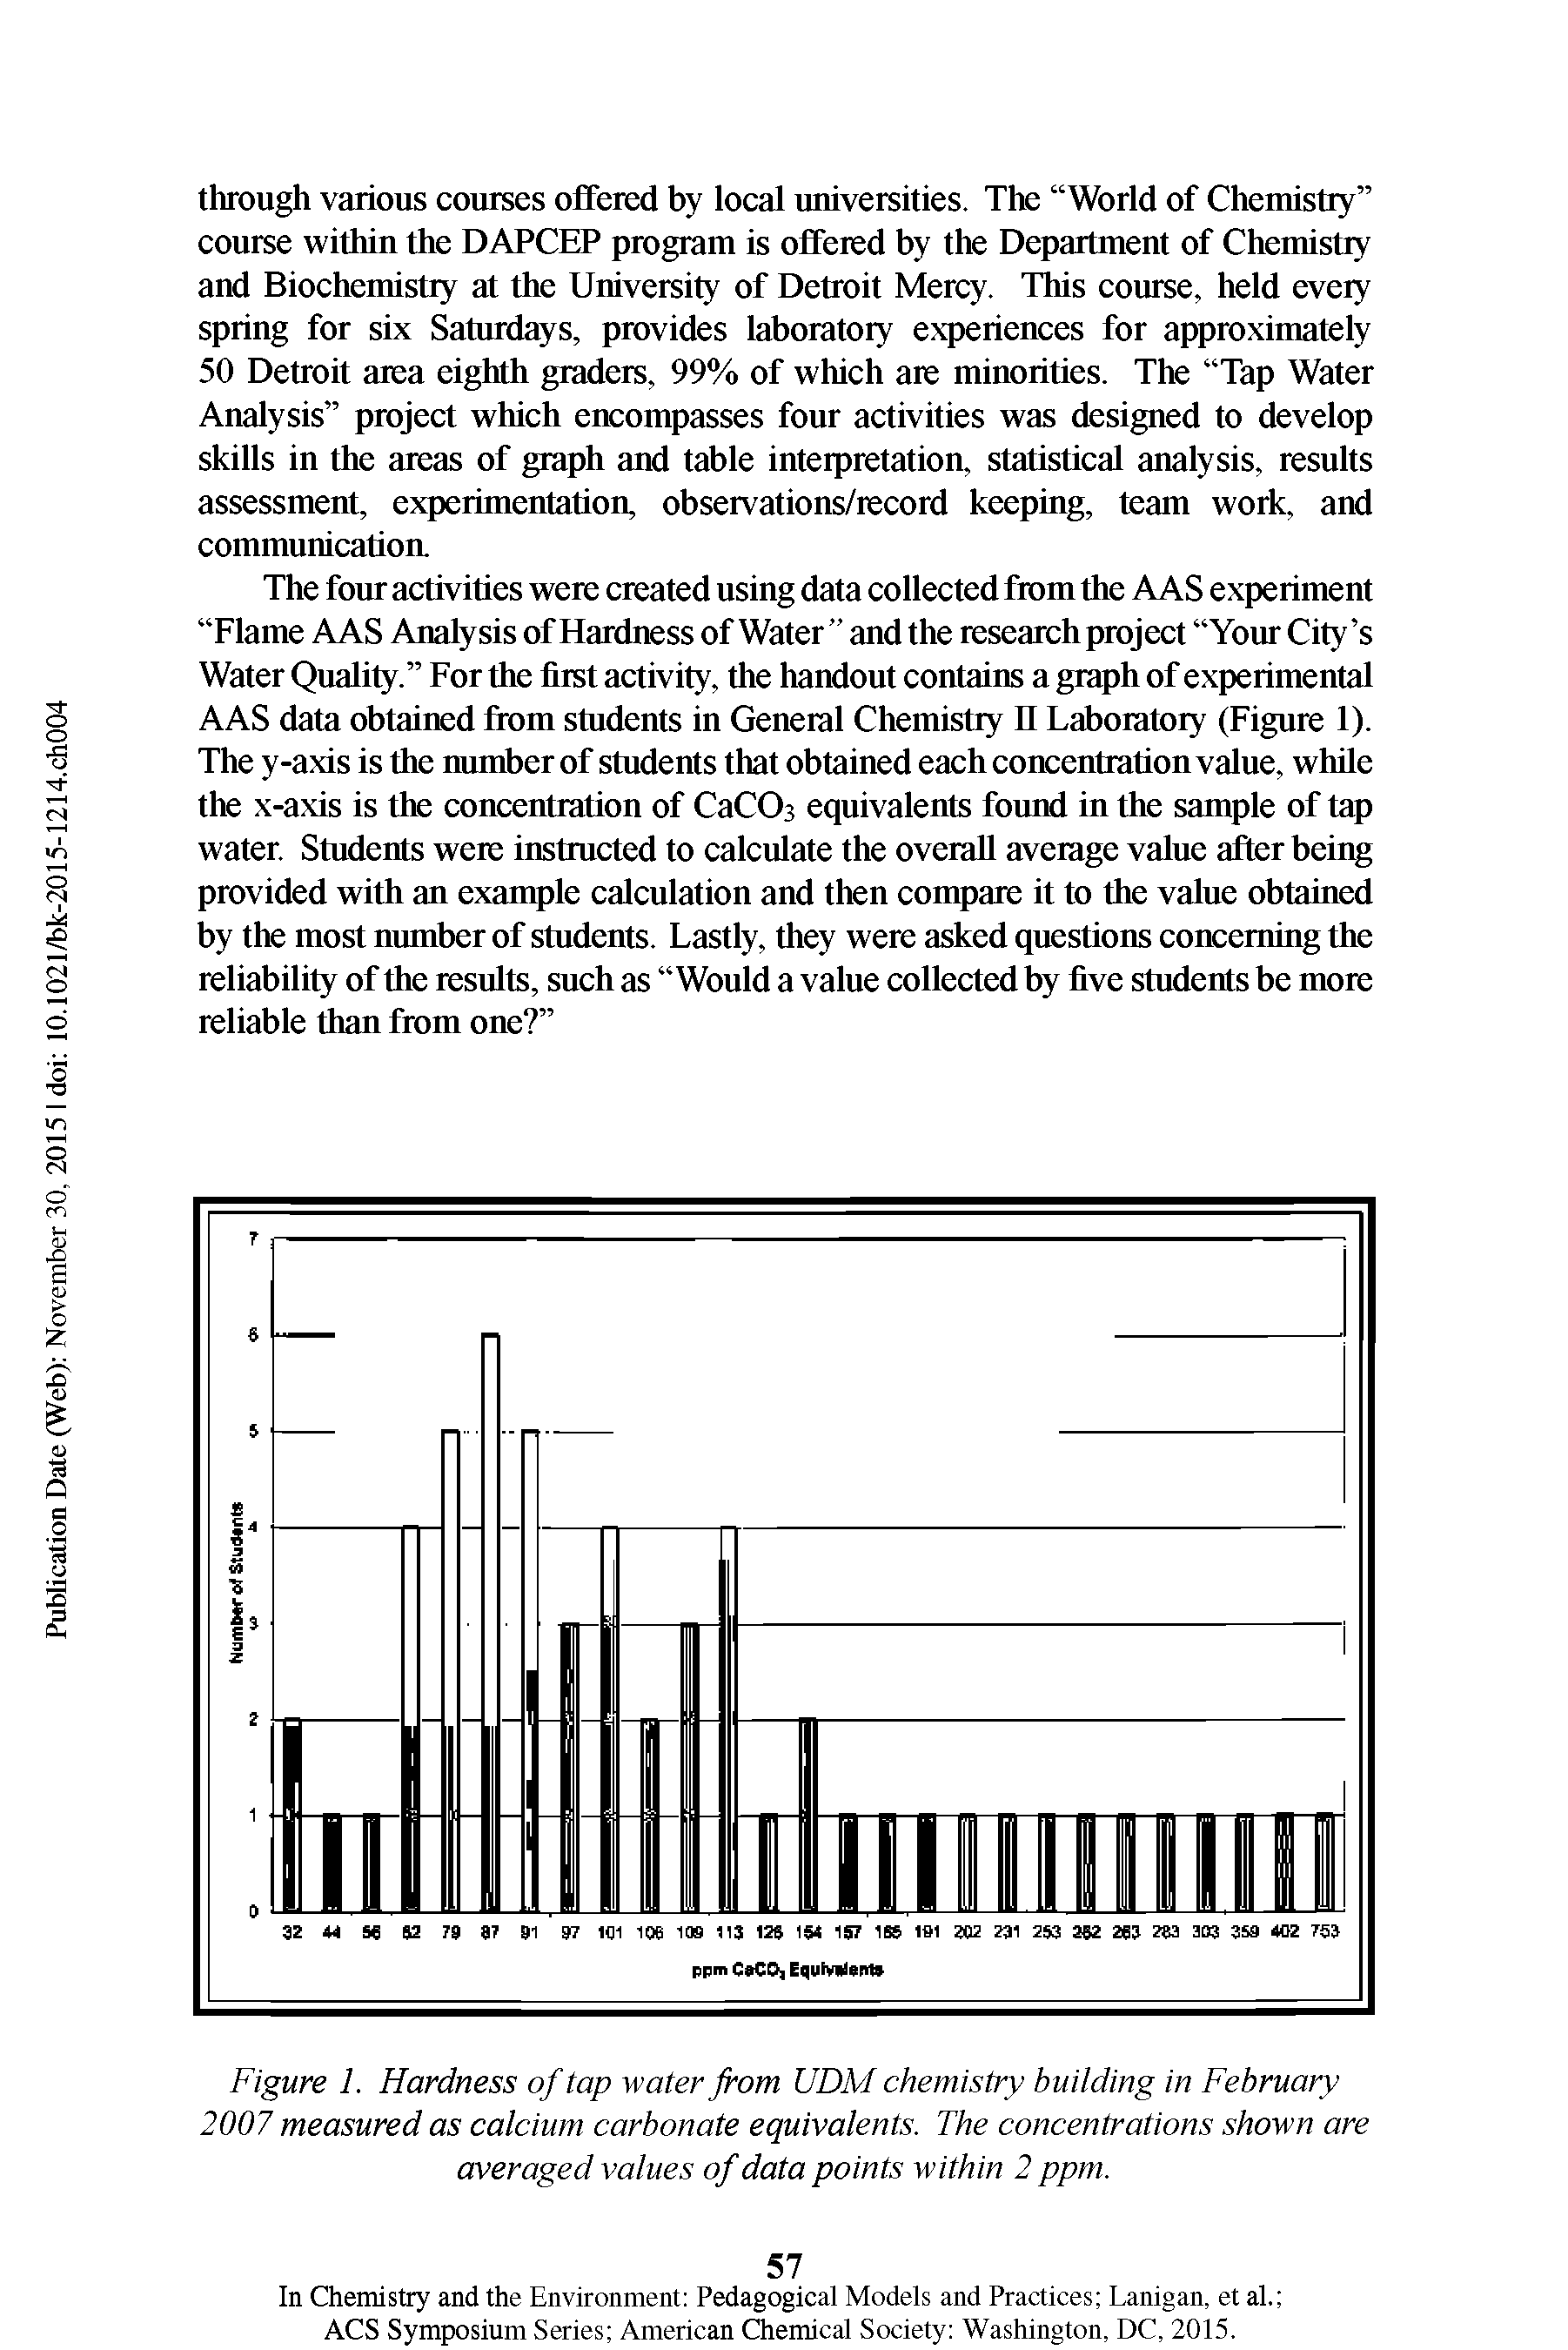 Figure 1. Hardness of tap water from UDM chemistry building in February 2007 measured as calcium carbonate equivalents. The concentrations shown are averaged values of data points within 2 ppm.